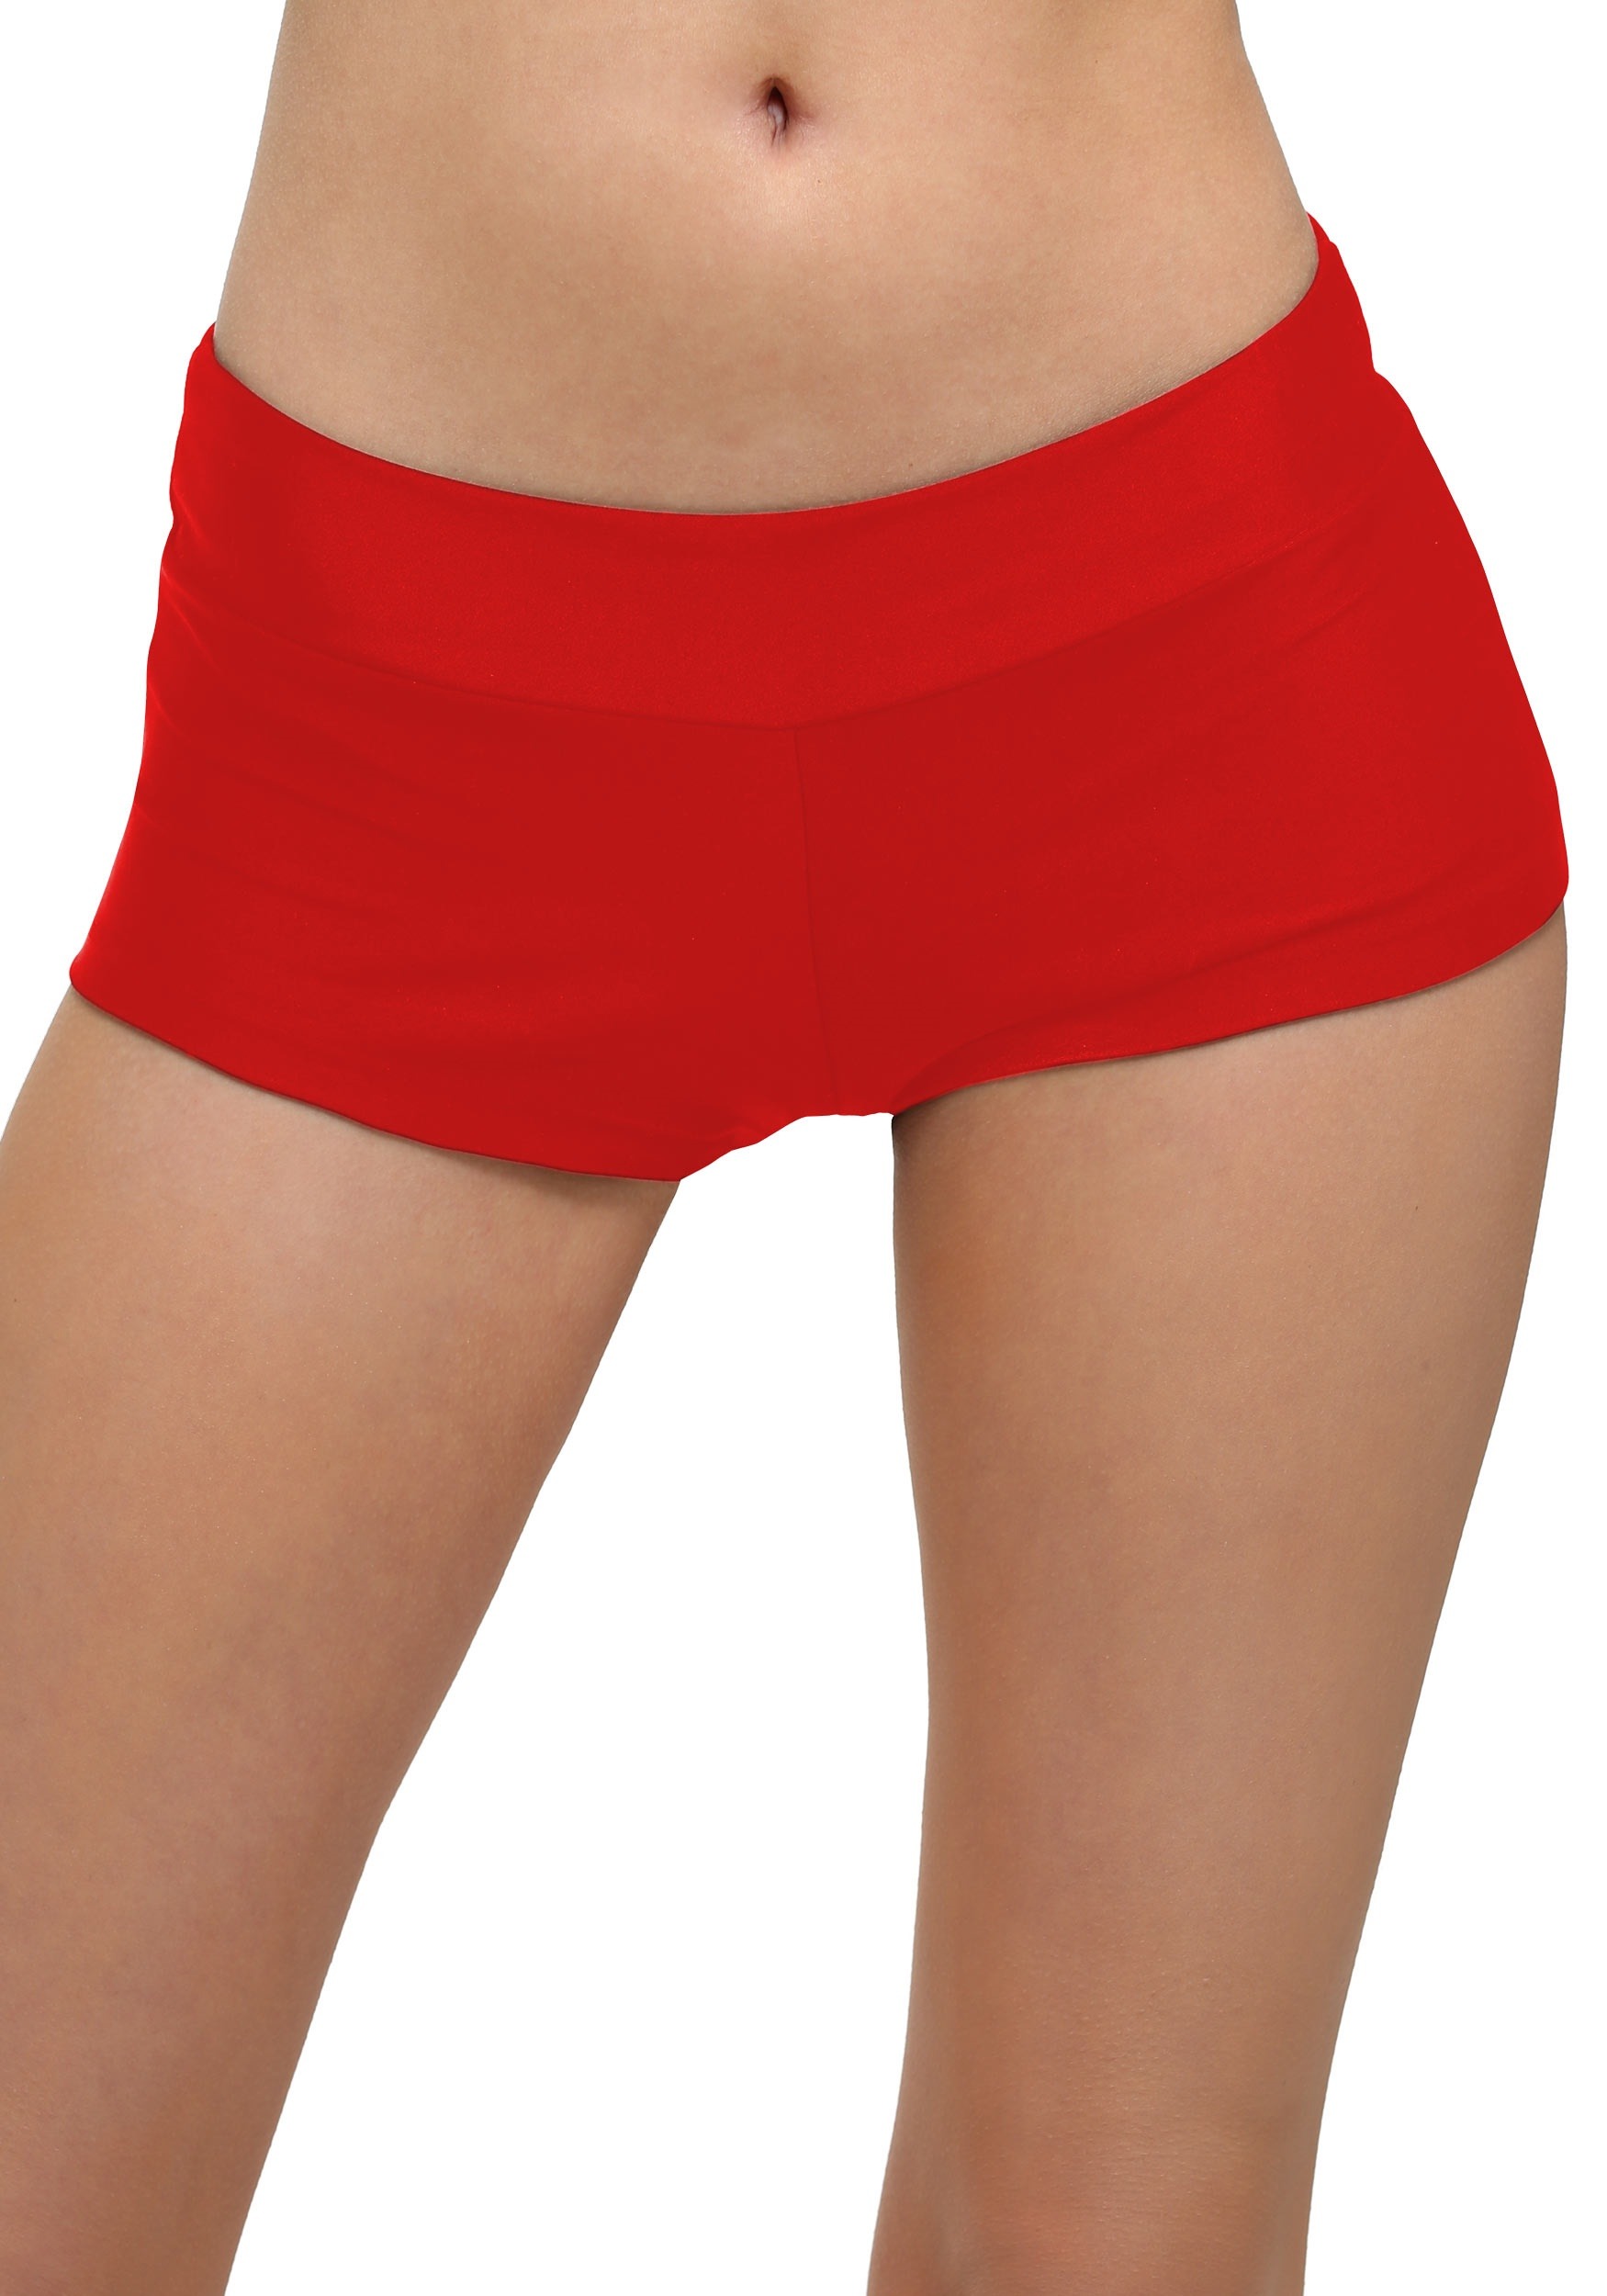 hot pants for womens